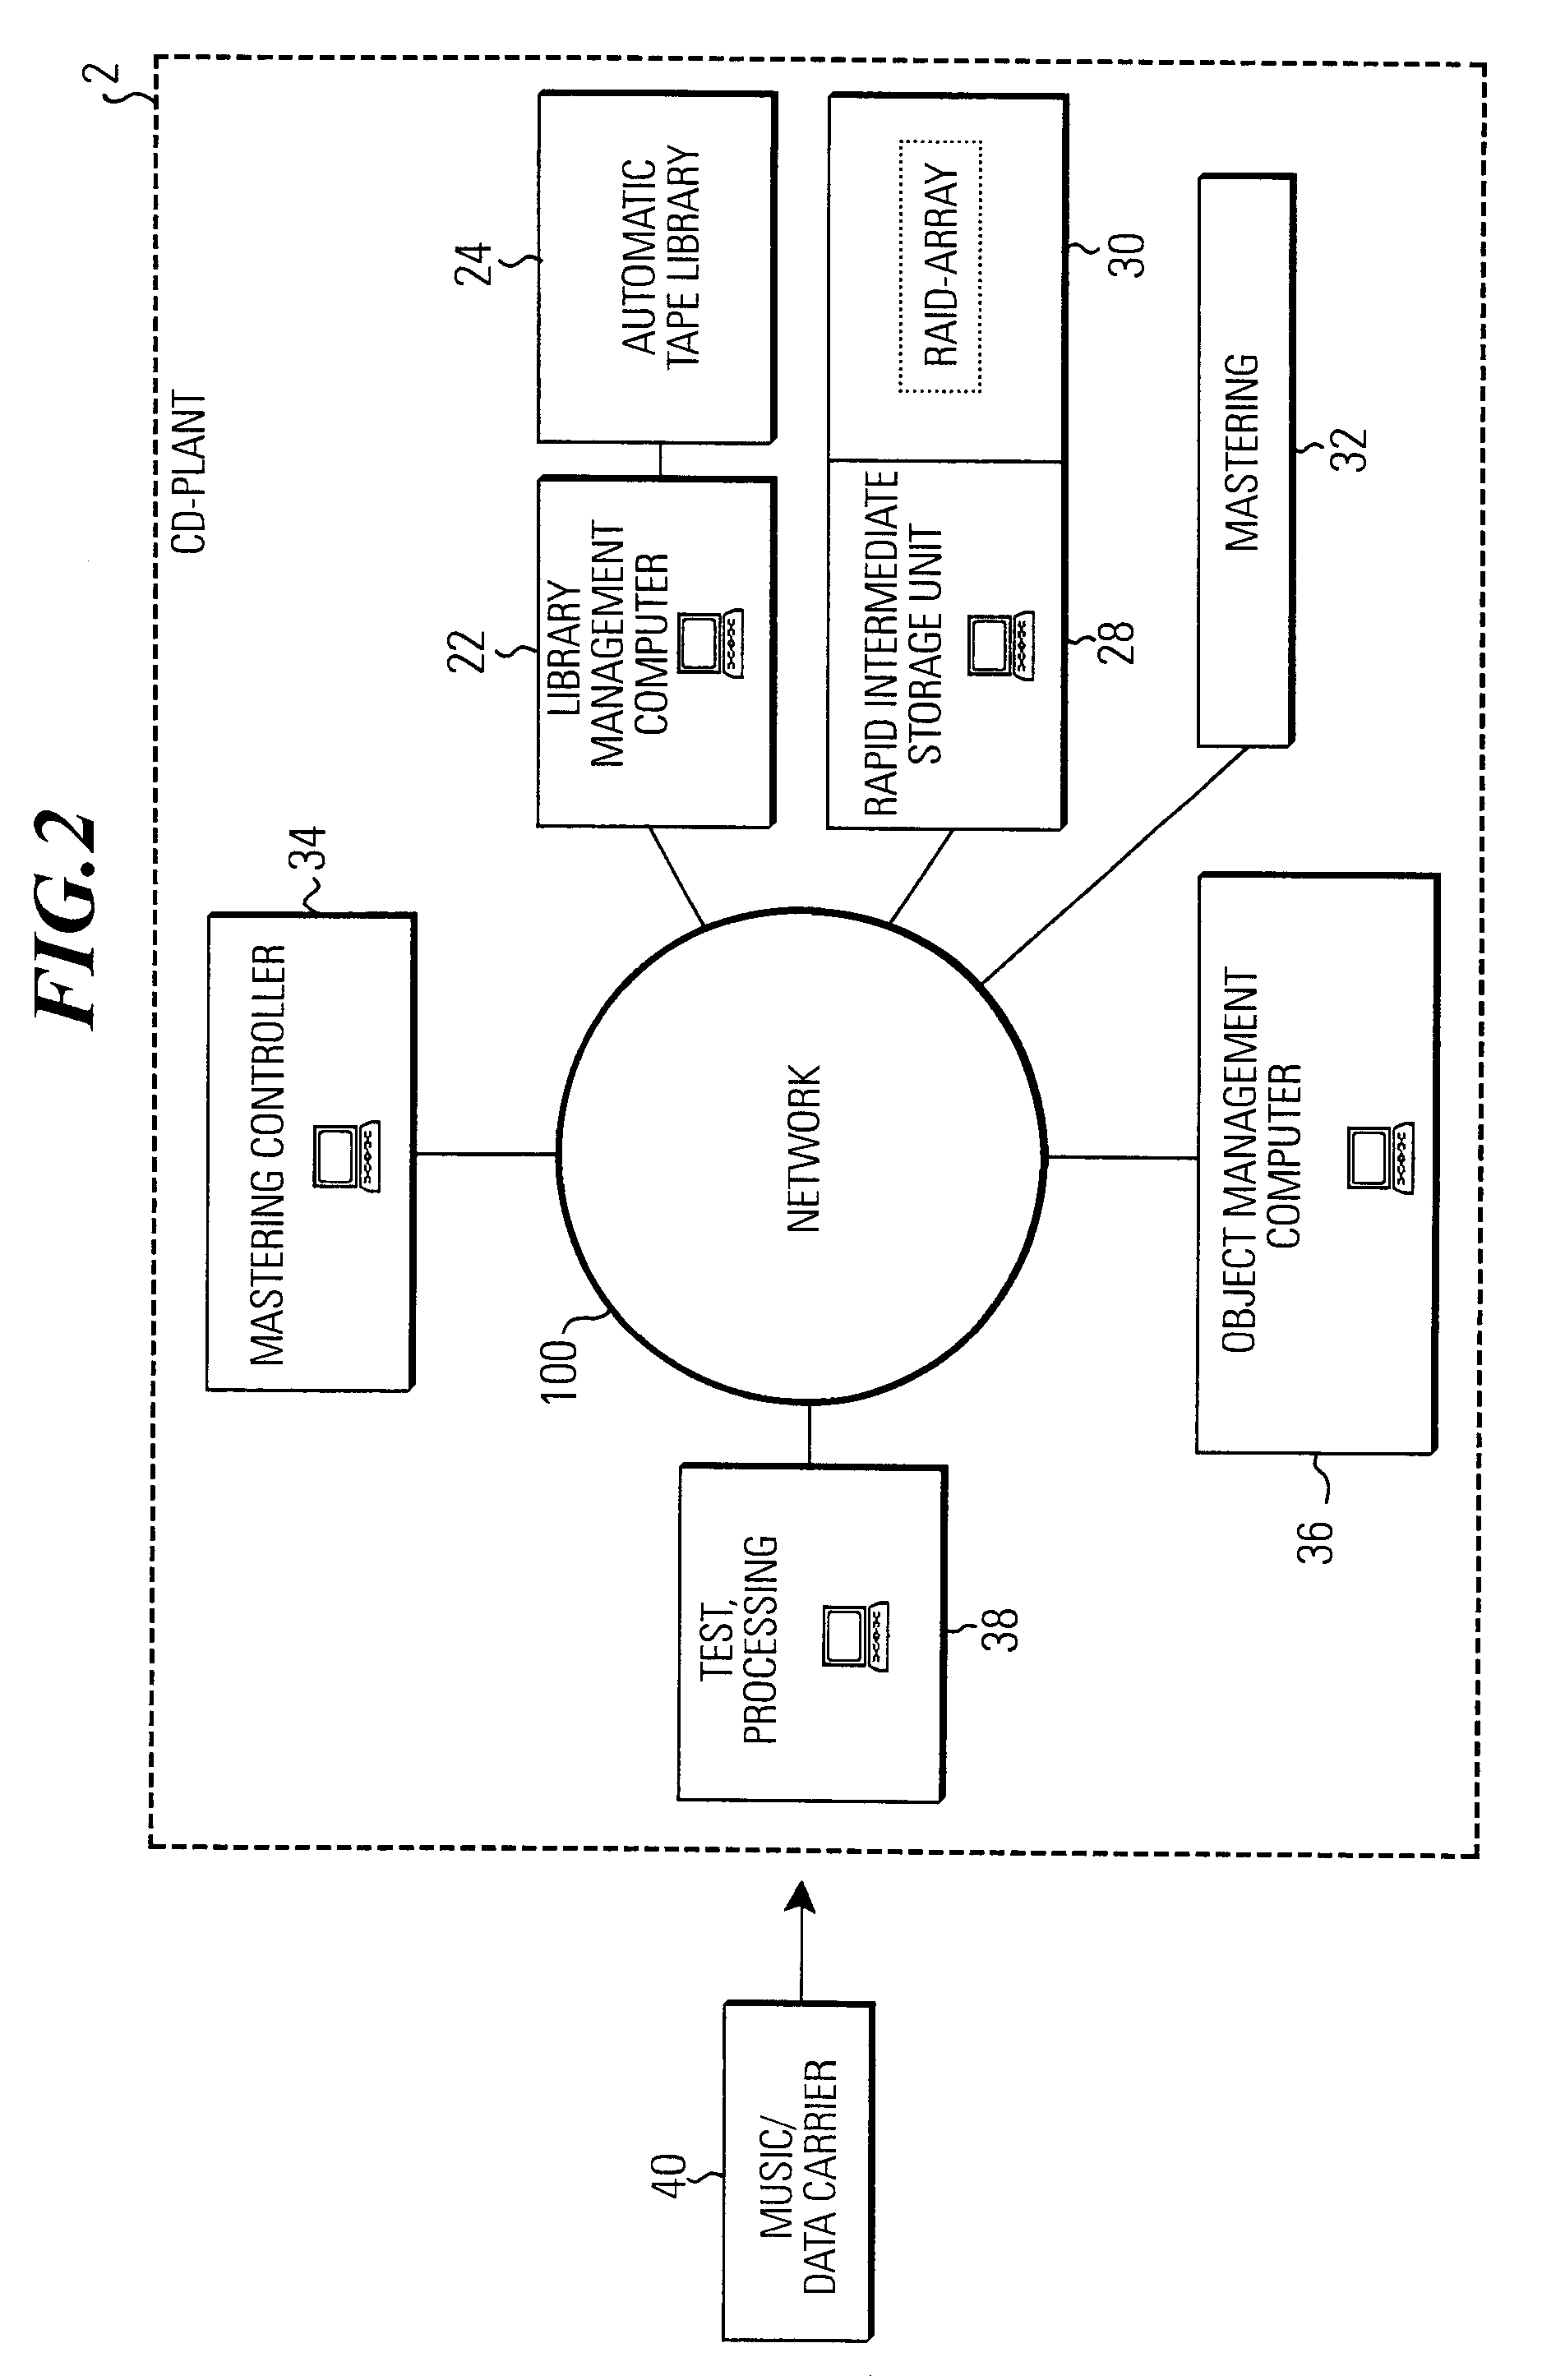 System and method for recording digital data on glass master recording disks